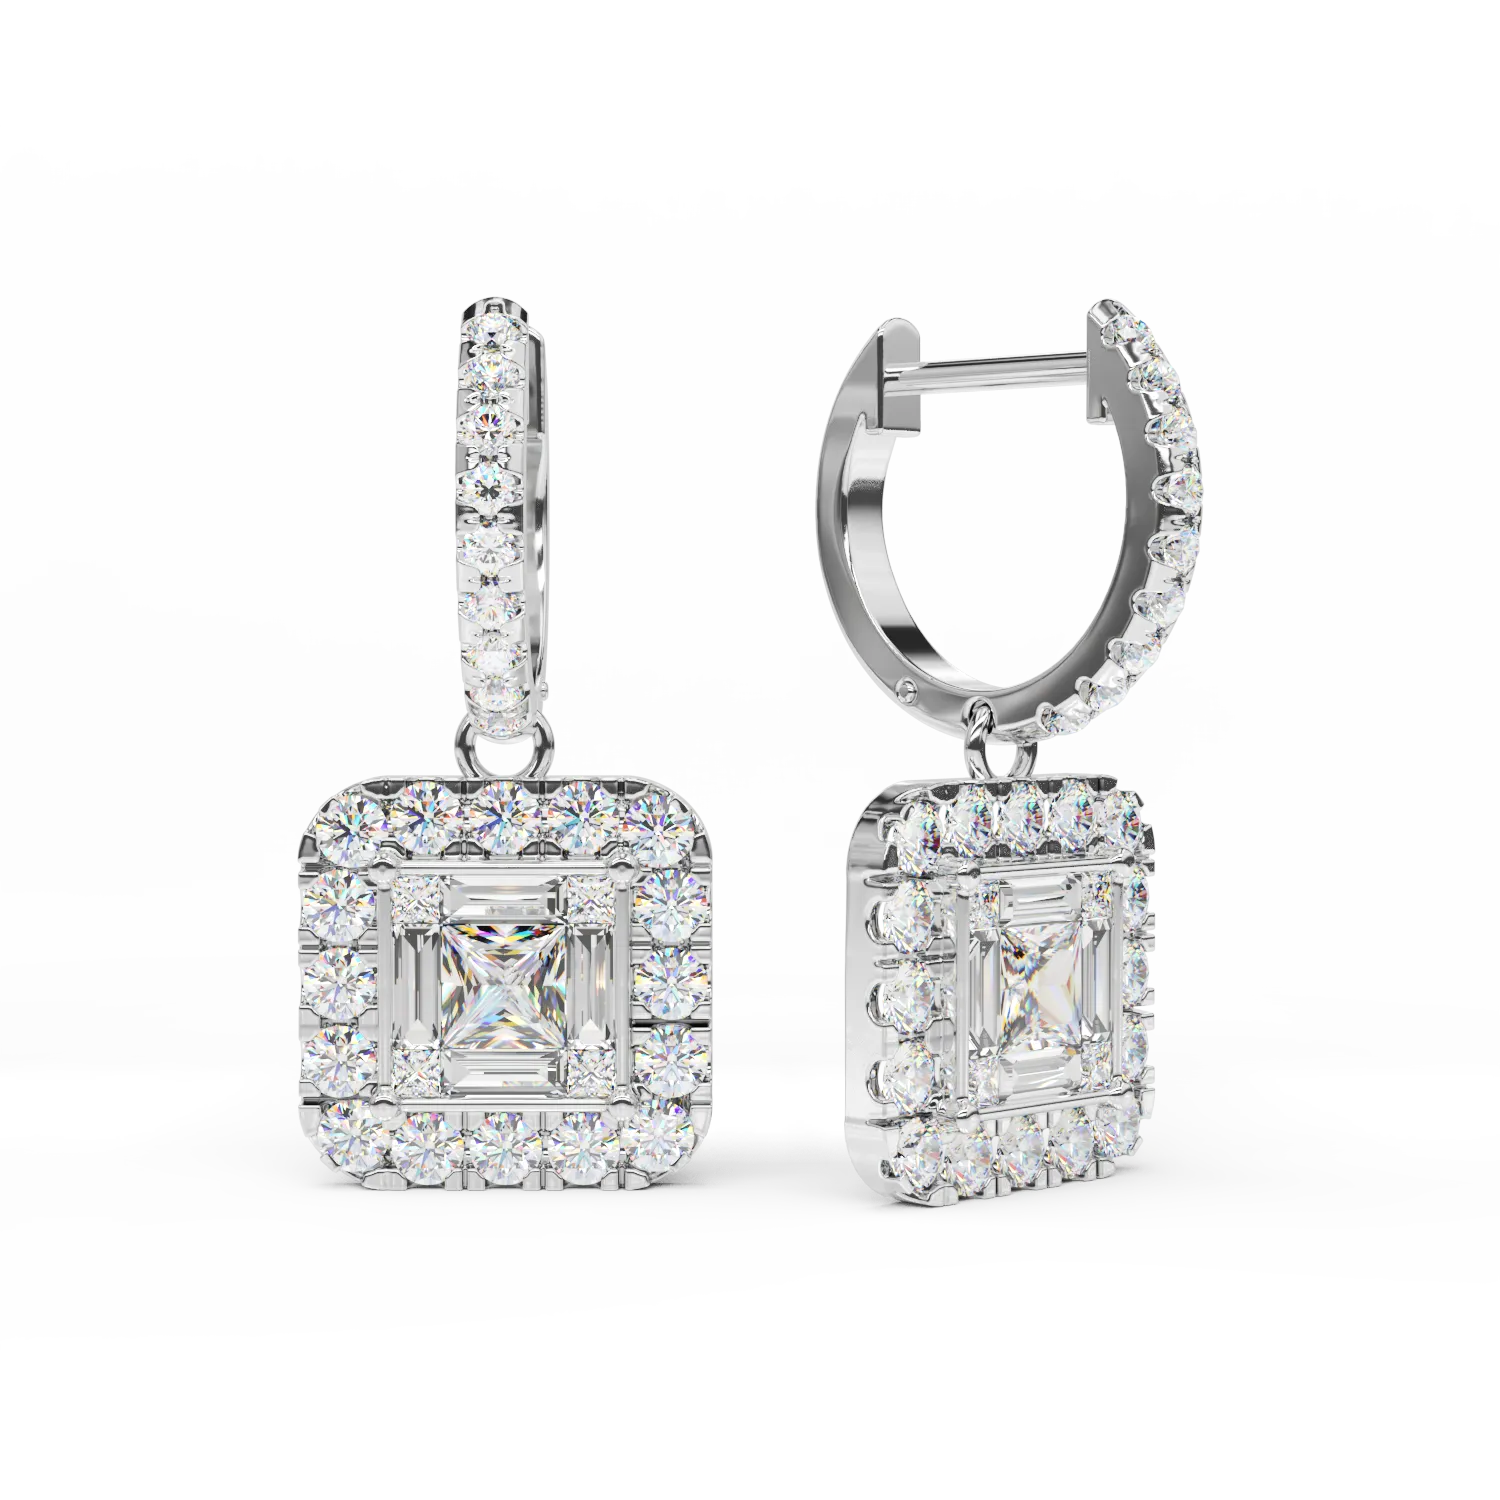 18K white gold earrings with 1.35ct diamonds